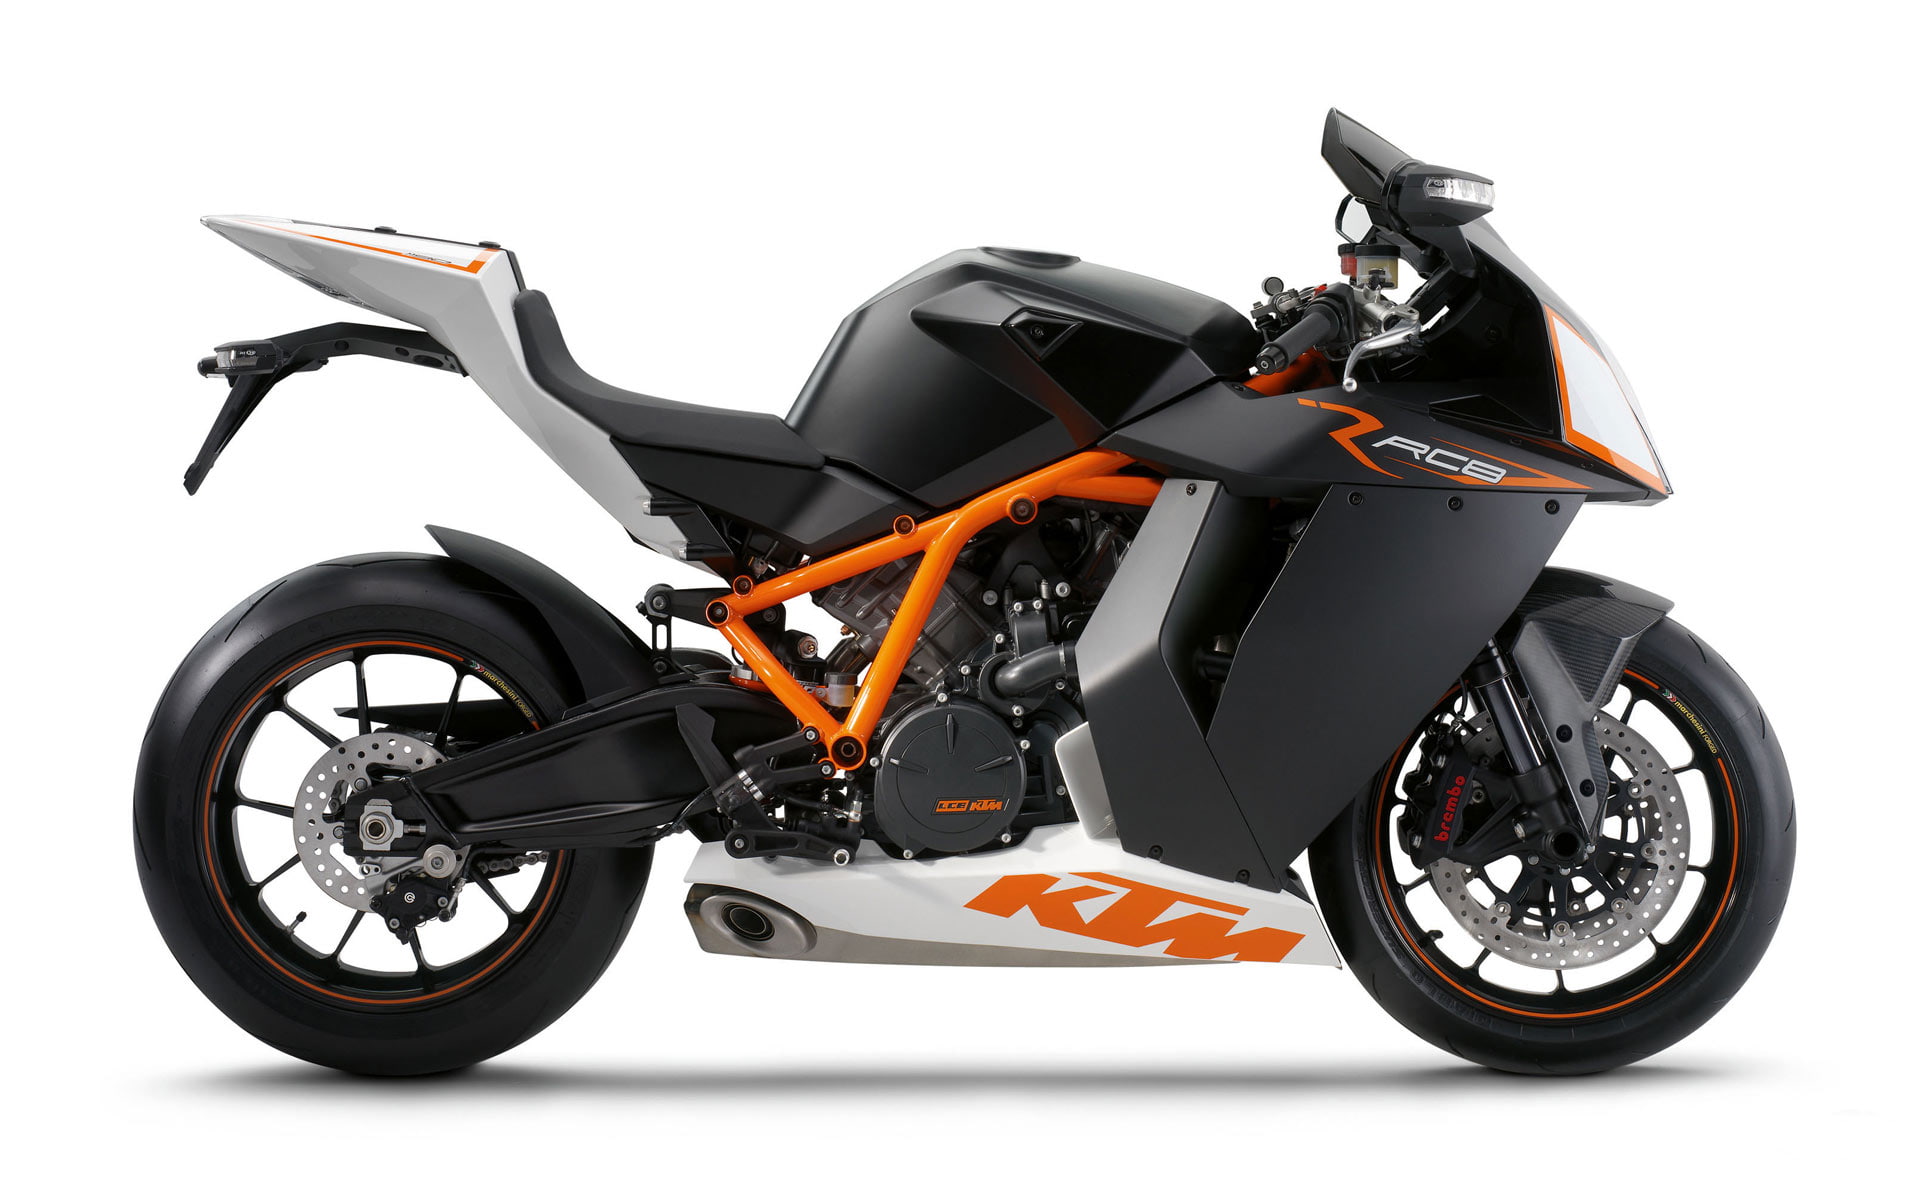 KTM RC8 HD, bikes, motorcycles, bikes and motorcycles